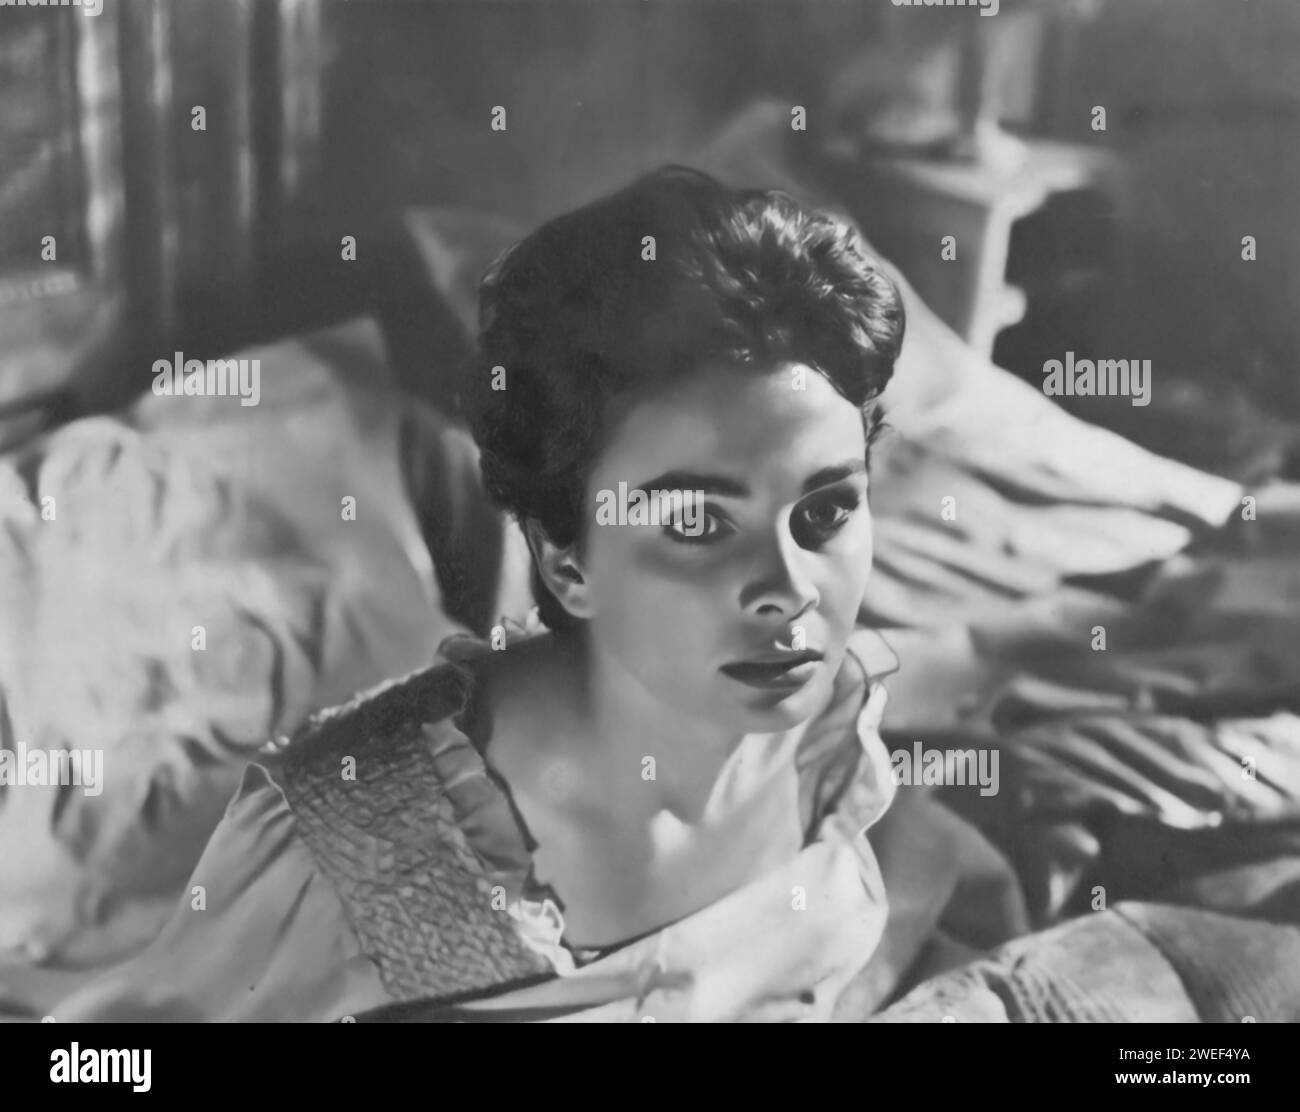 A portrait of Jean Simmons, a celebrated actress known for her role in 'Cage of Gold' (1950). In this British drama, Simmons plays Judith Moray, a young woman who faces emotional turmoil and legal challenges when her presumed-dead husband unexpectedly returns. Stock Photo